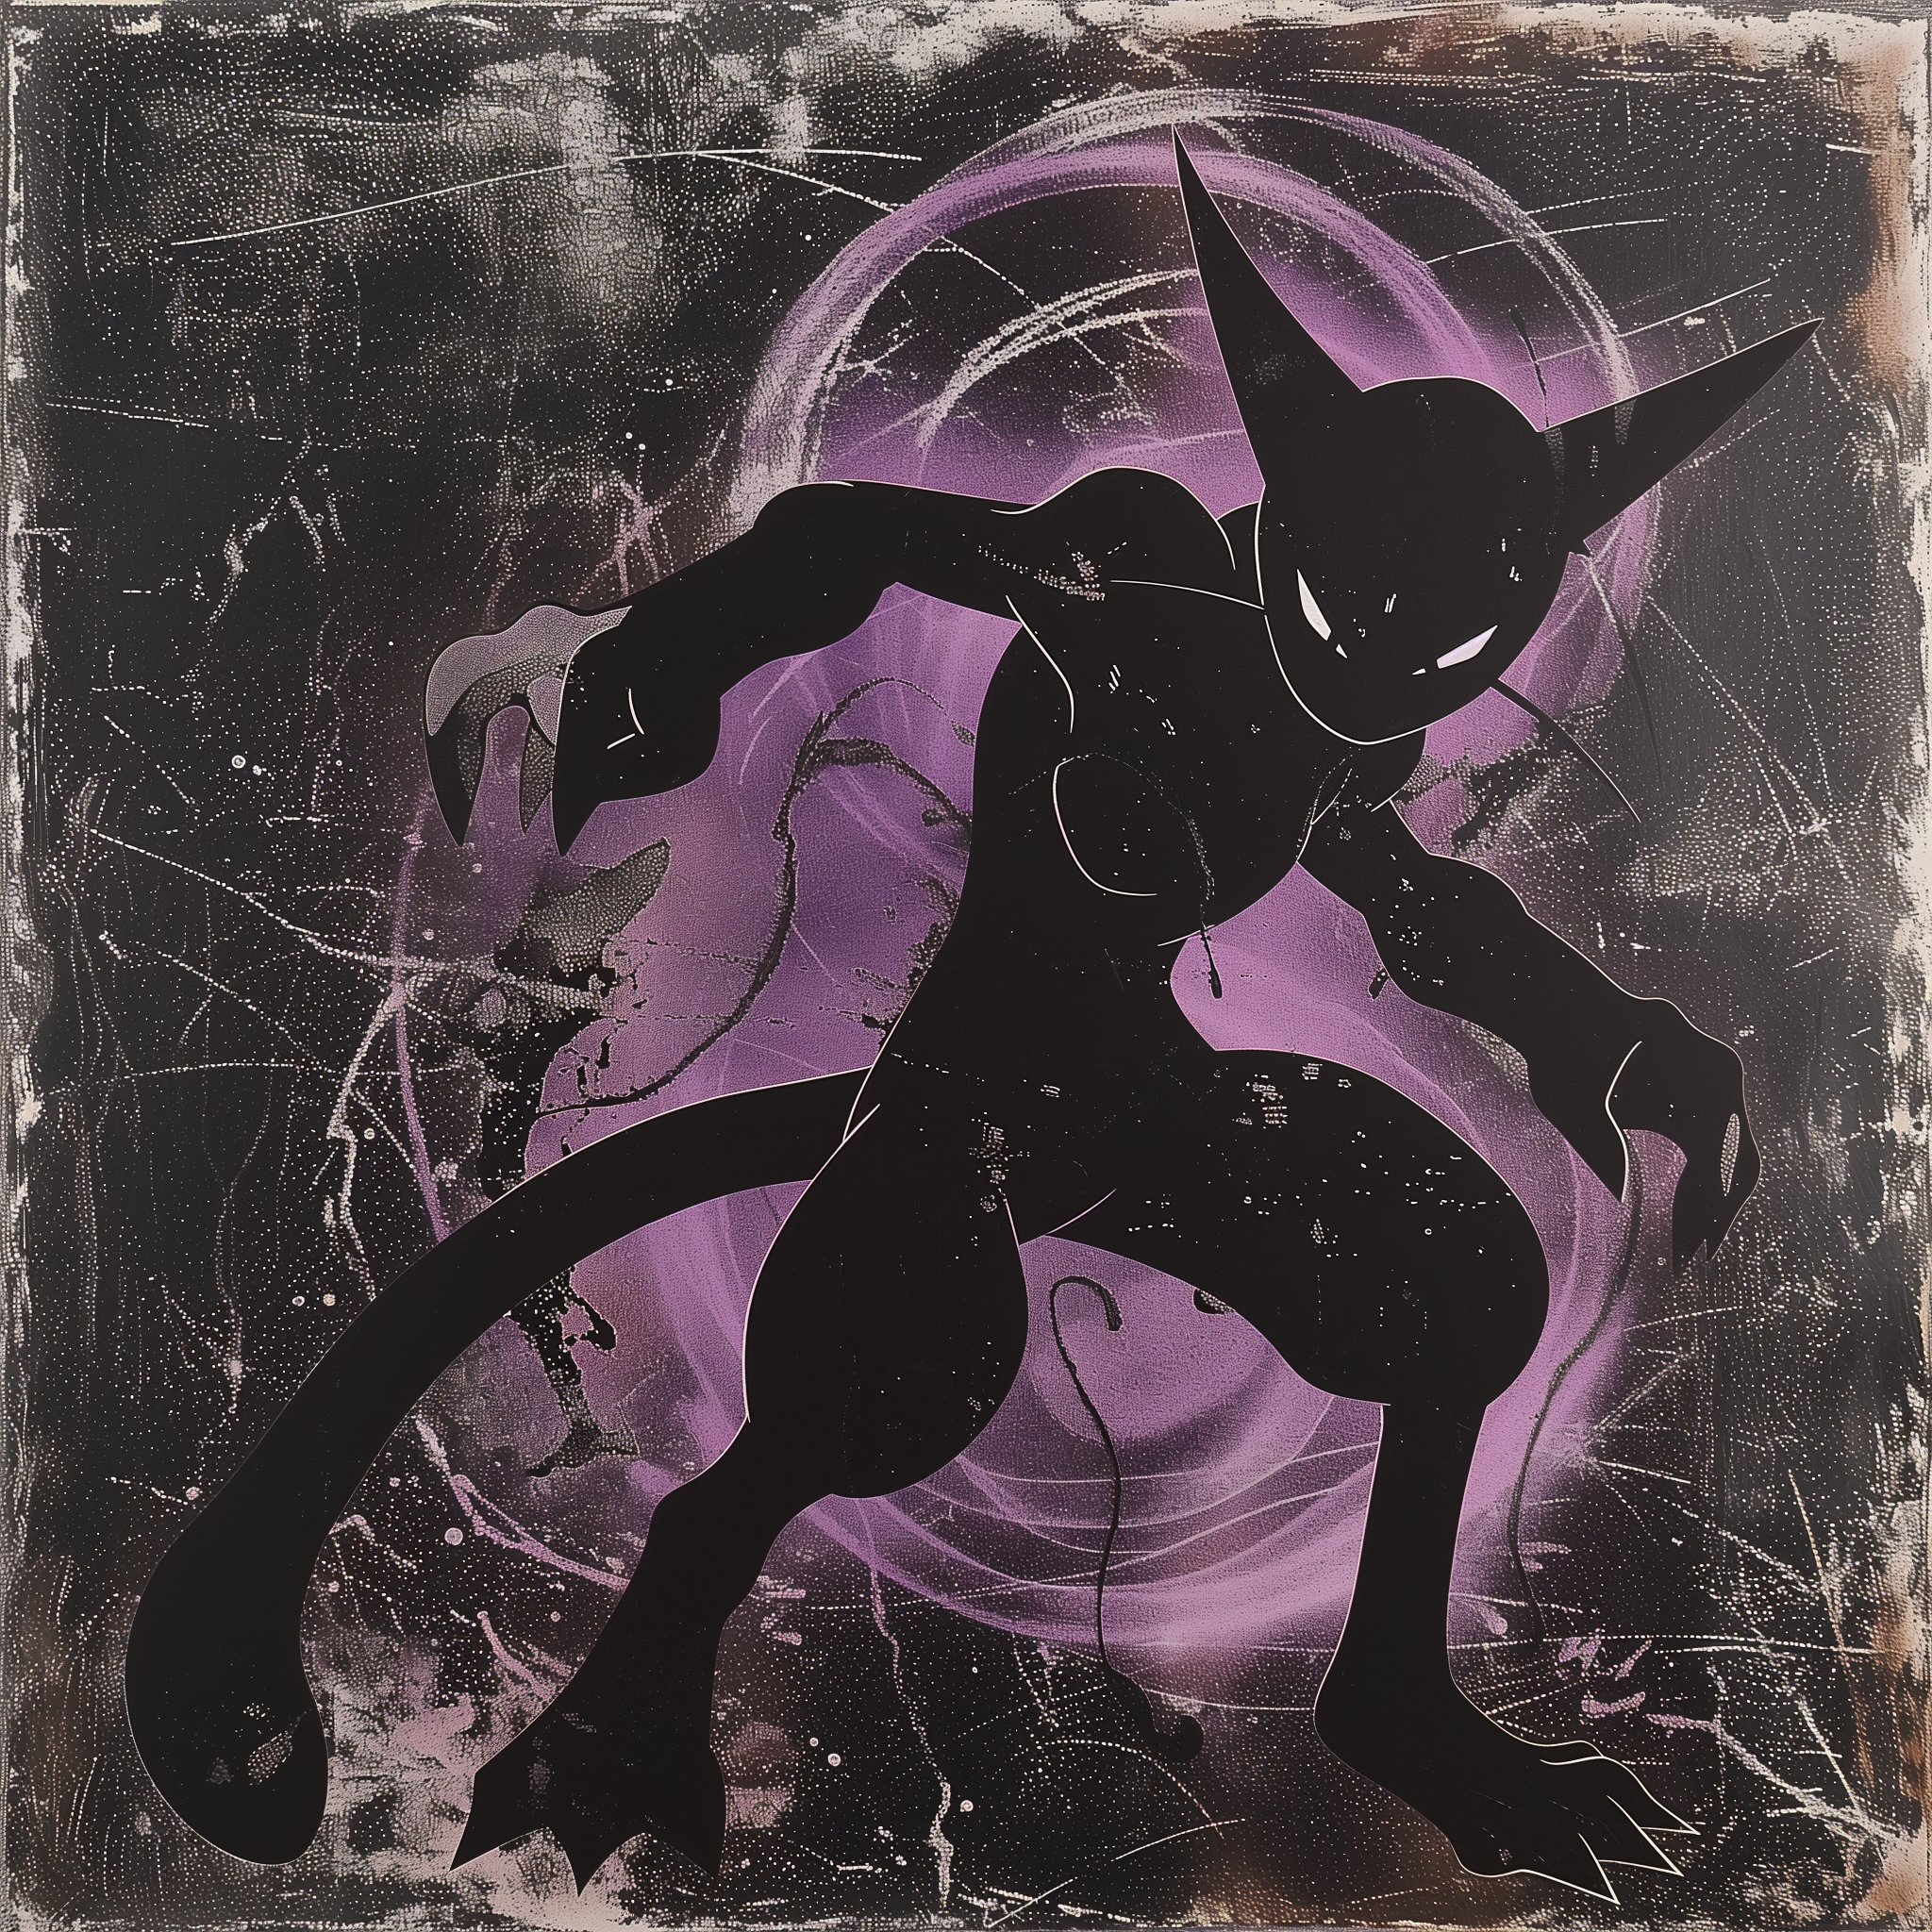 Stylized avatar of Mewtwo, a popular Pokémon, showcasing its silhouette with a psychic energy background, suitable for profile picture use.